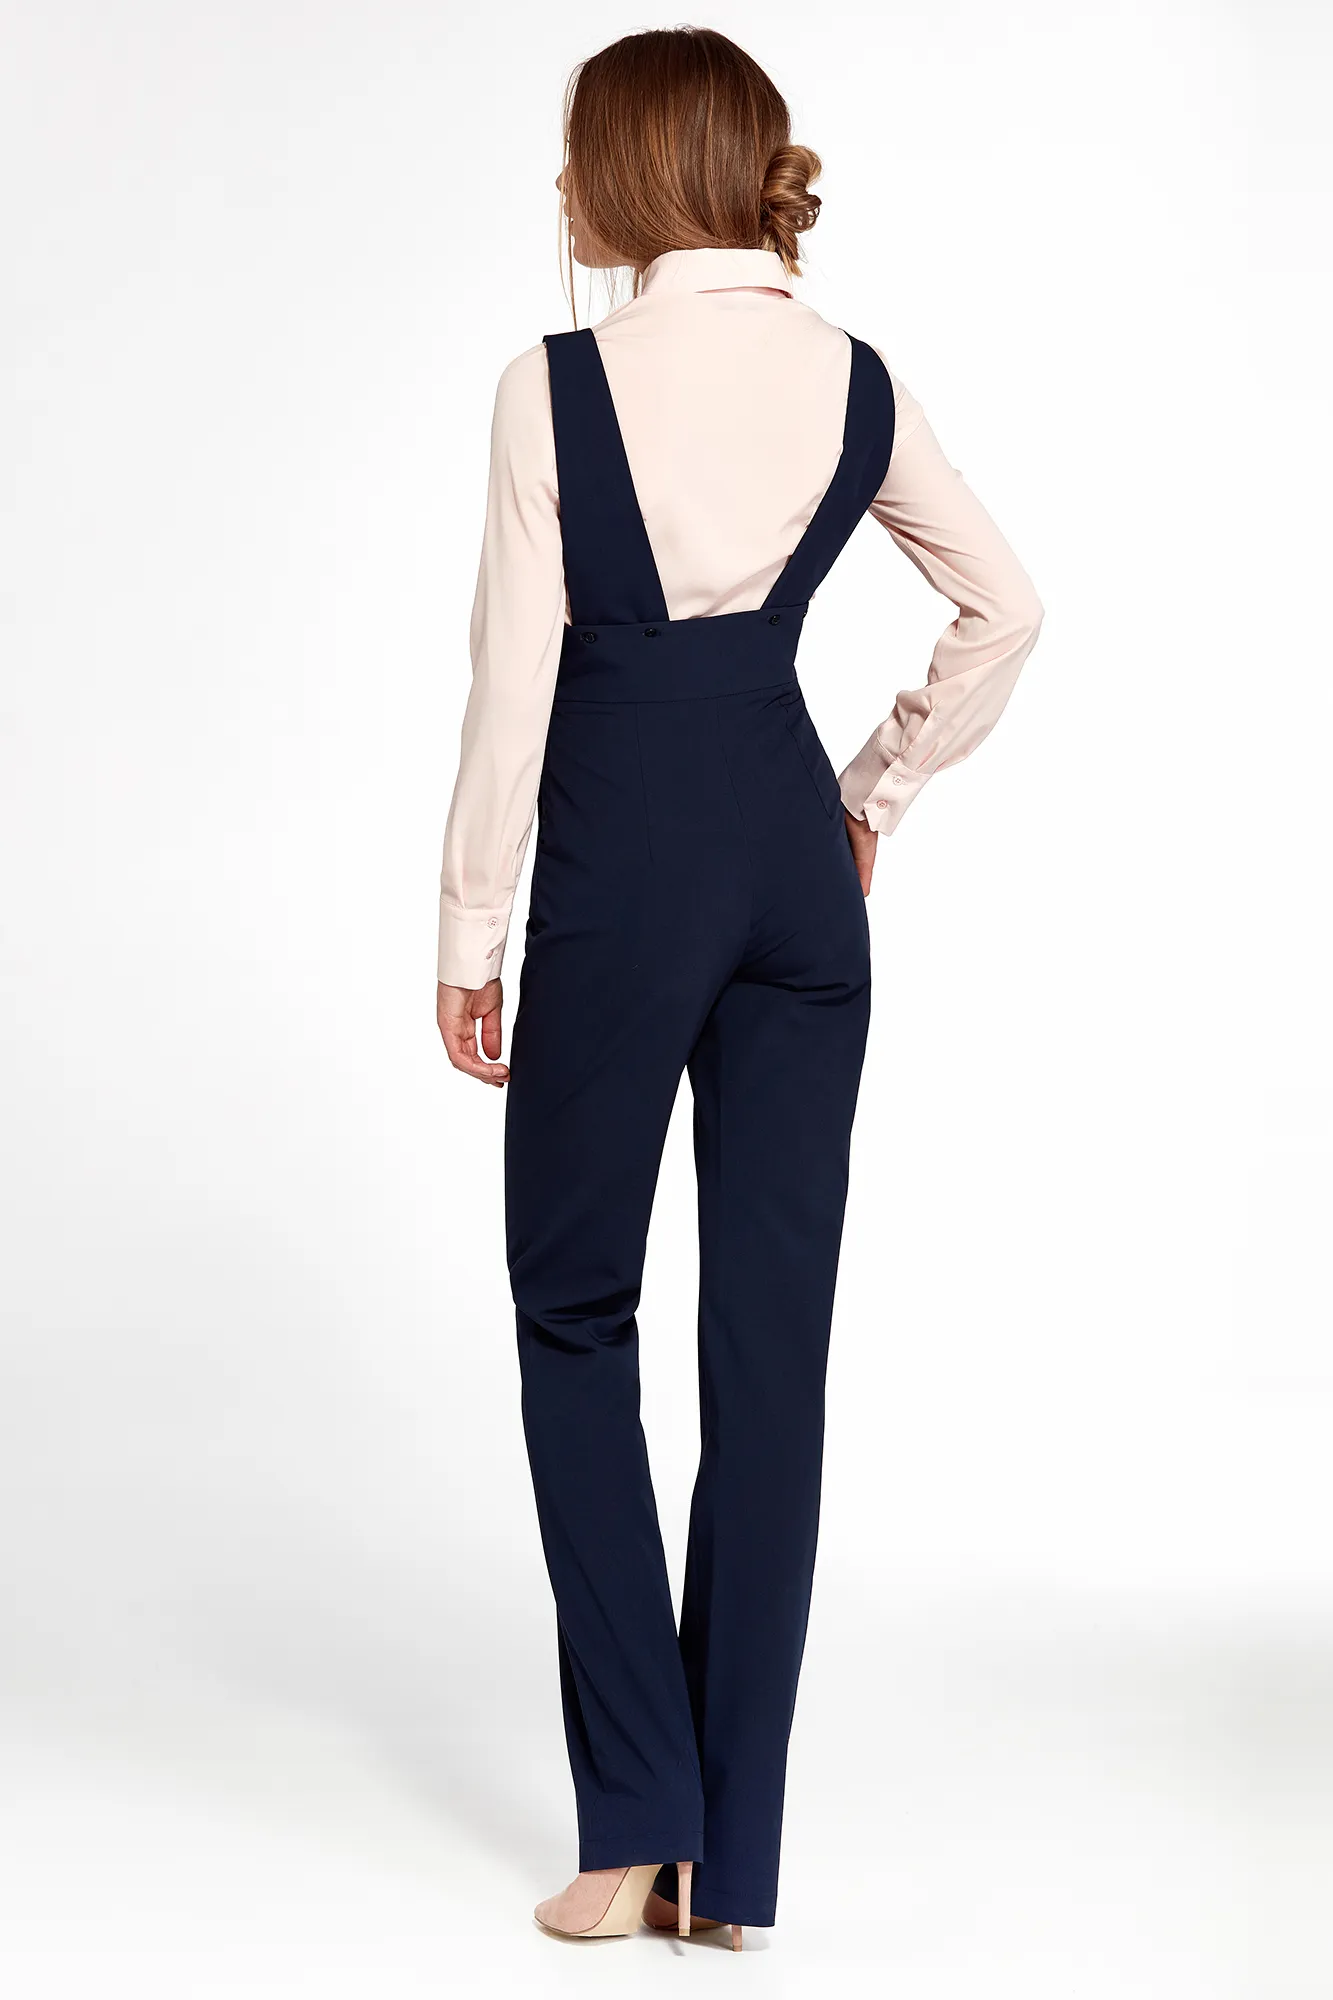 stave Recite Udover Jumpsuit with suspenders - navy blue - Nife